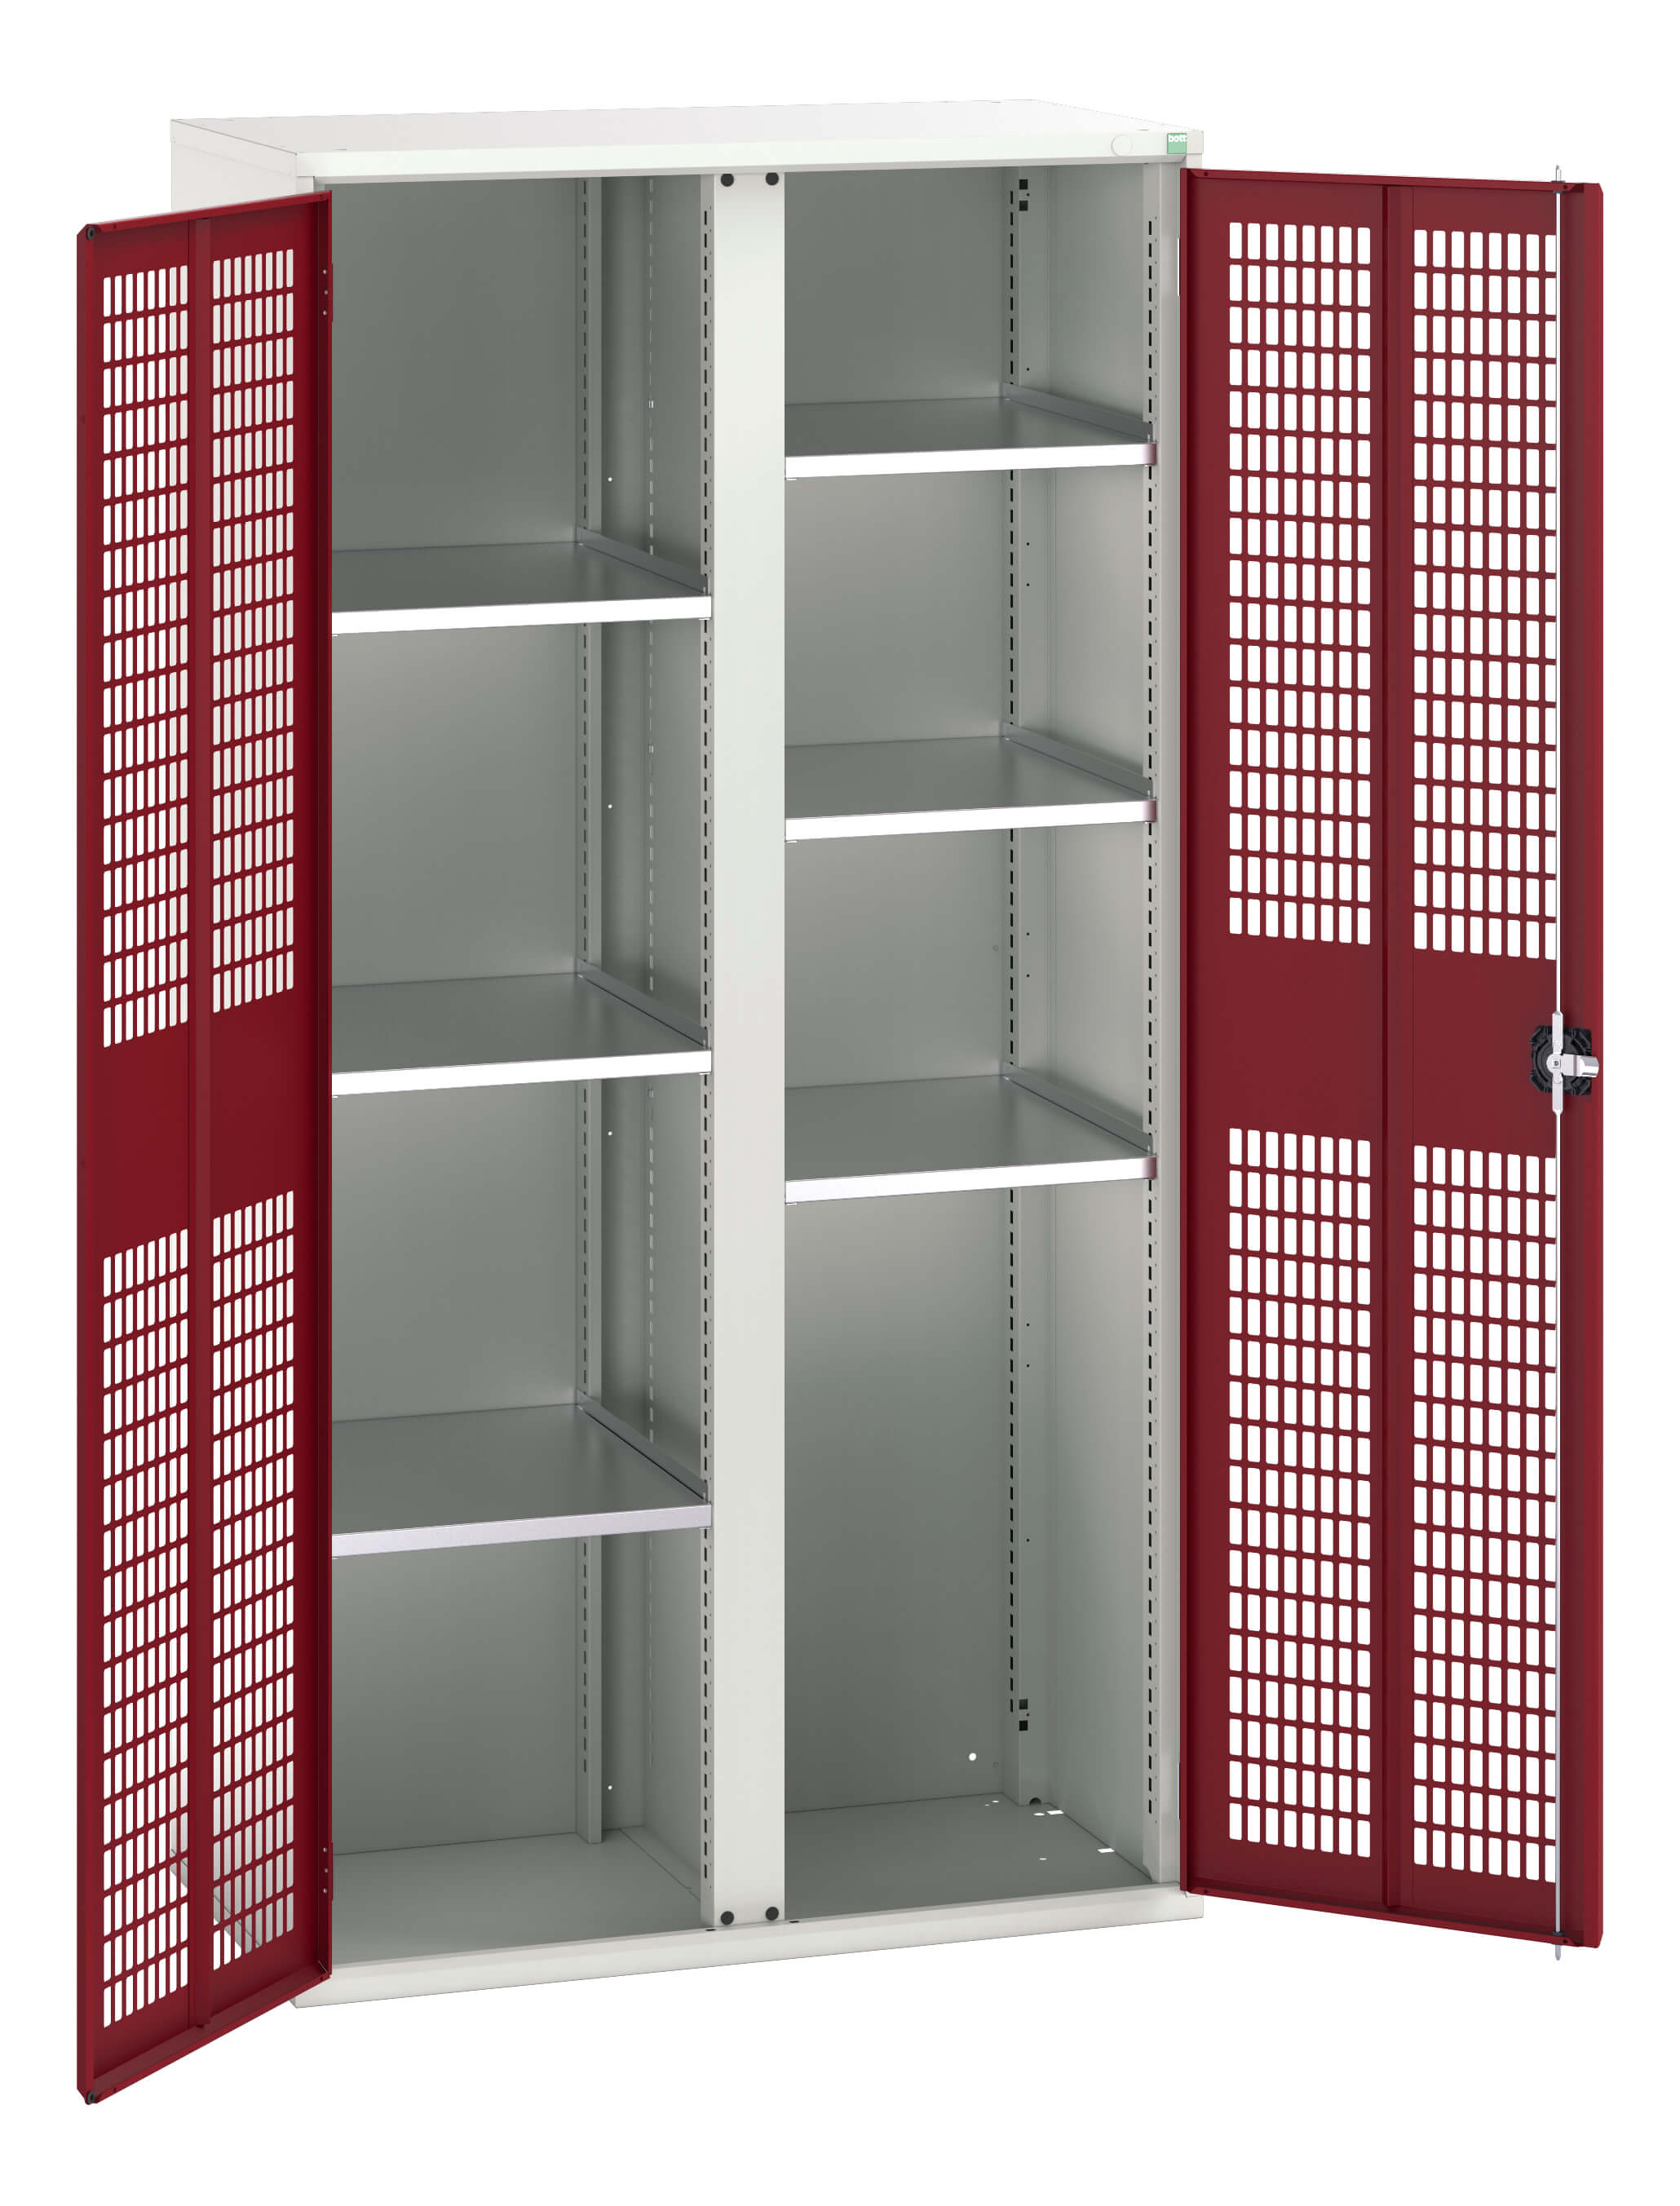 Bott Verso Ventilated Door Kitted Cupboard With Vertical Partition - 16926775.24